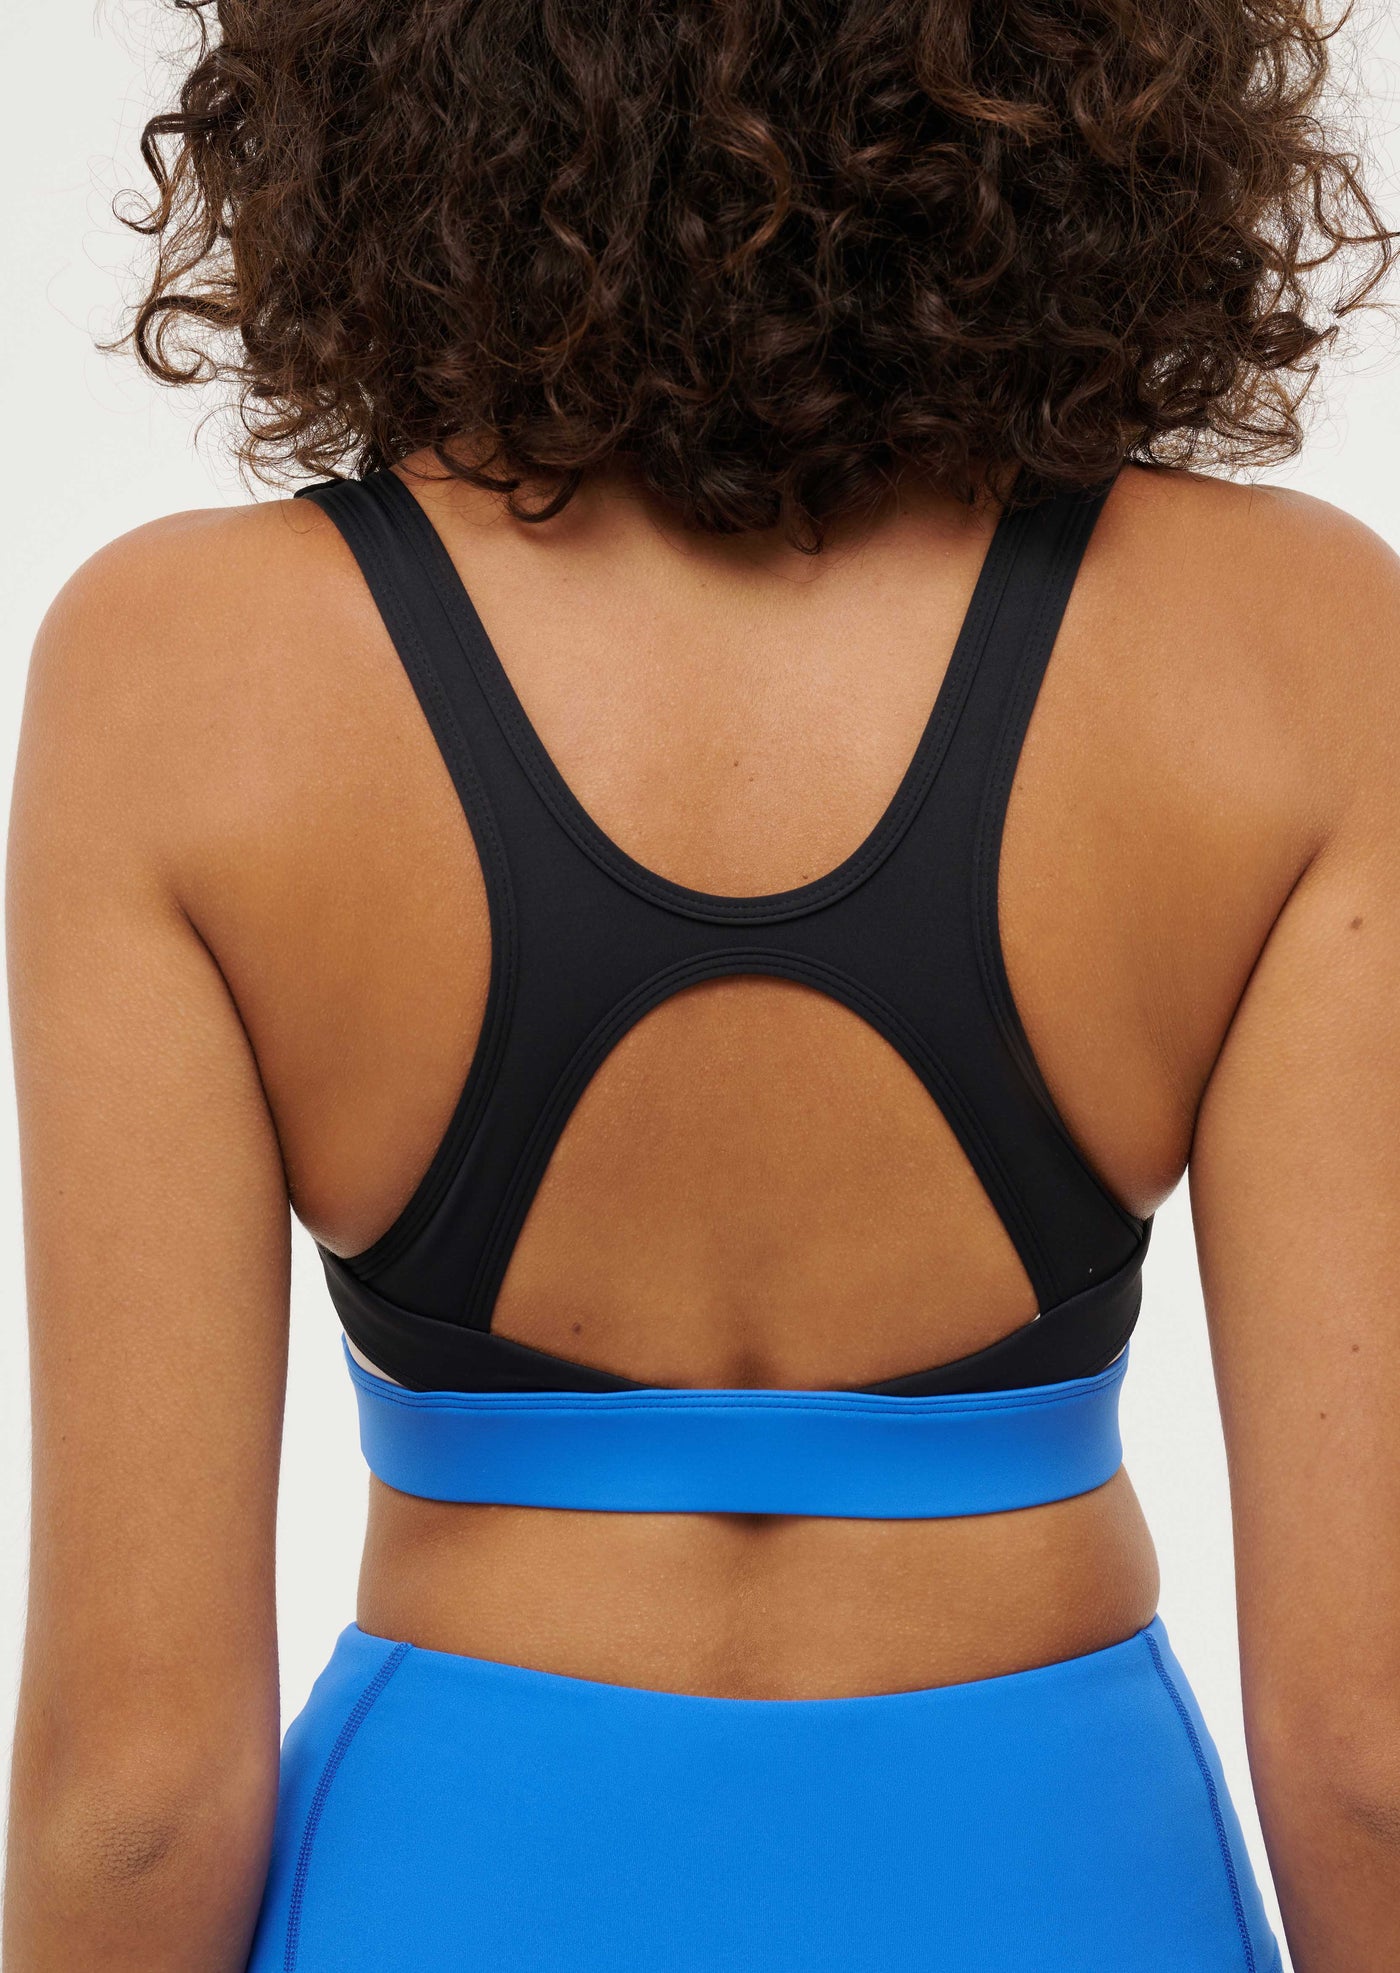 REACTION TIME SPORTS BRA IN PEARLED IVORY